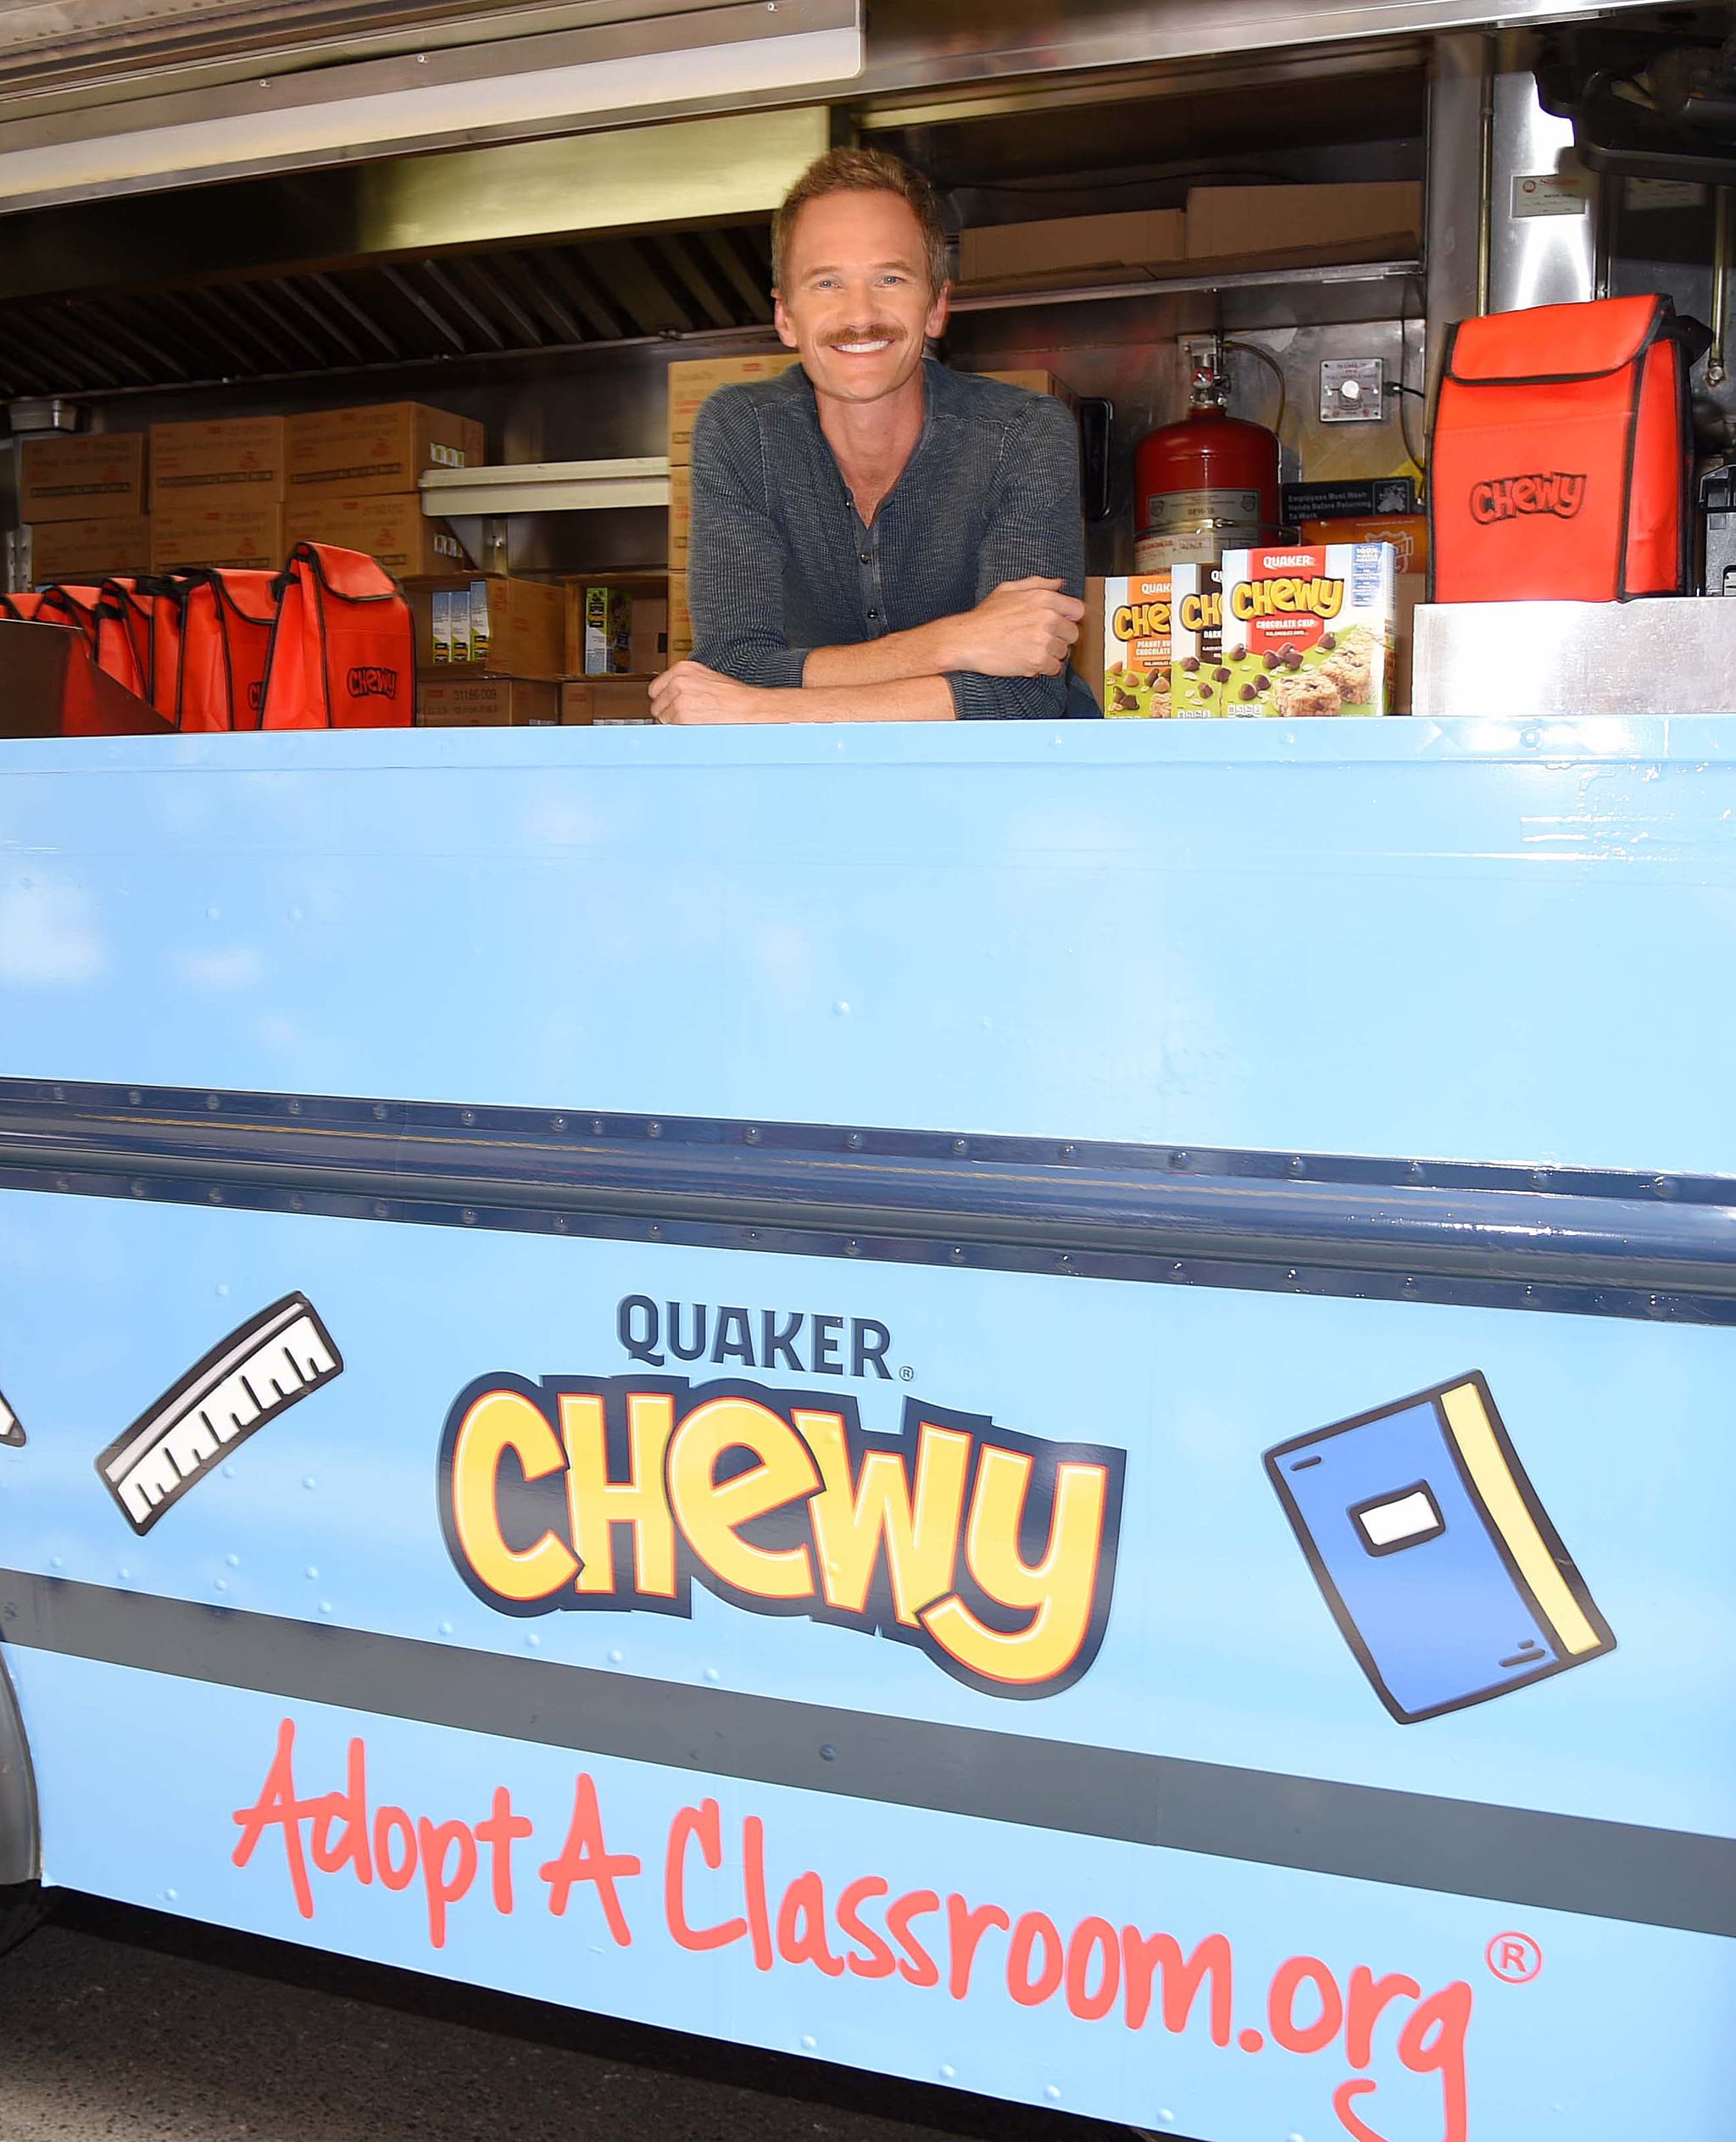 - New York, NY - 09/04/2019 -Neil Patrick Harris spotted at the Quaker Chewy food truck in New York City to celebrate wholesome snacking and the brand's partnership with AdoptAClassroom.org.-PICTURED: Neil Patrick Harris-PHOTO by: Michael Simon/startraksphoto.com-MS95883Editorial - Rights Managed Image - Please contact www.startraksphoto.com for licensing fee Startraks PhotoStartraks PhotoNew York, NY For licensing please call 212-414-9464 or email sales@startraksphoto.comImage may not be published in any way that is or might be deemed defamatory, libelous, pornographic, or obscene. Please consult our sales department for any clarification or question you may haveStartraks Photo reserves the right to pursue unauthorized users of this image. If you violate our intellectual property you may be liable for actual damages, loss of income, and profits you derive from the use of this image, and where appropriate, the cost of collection and/or statutory damages.